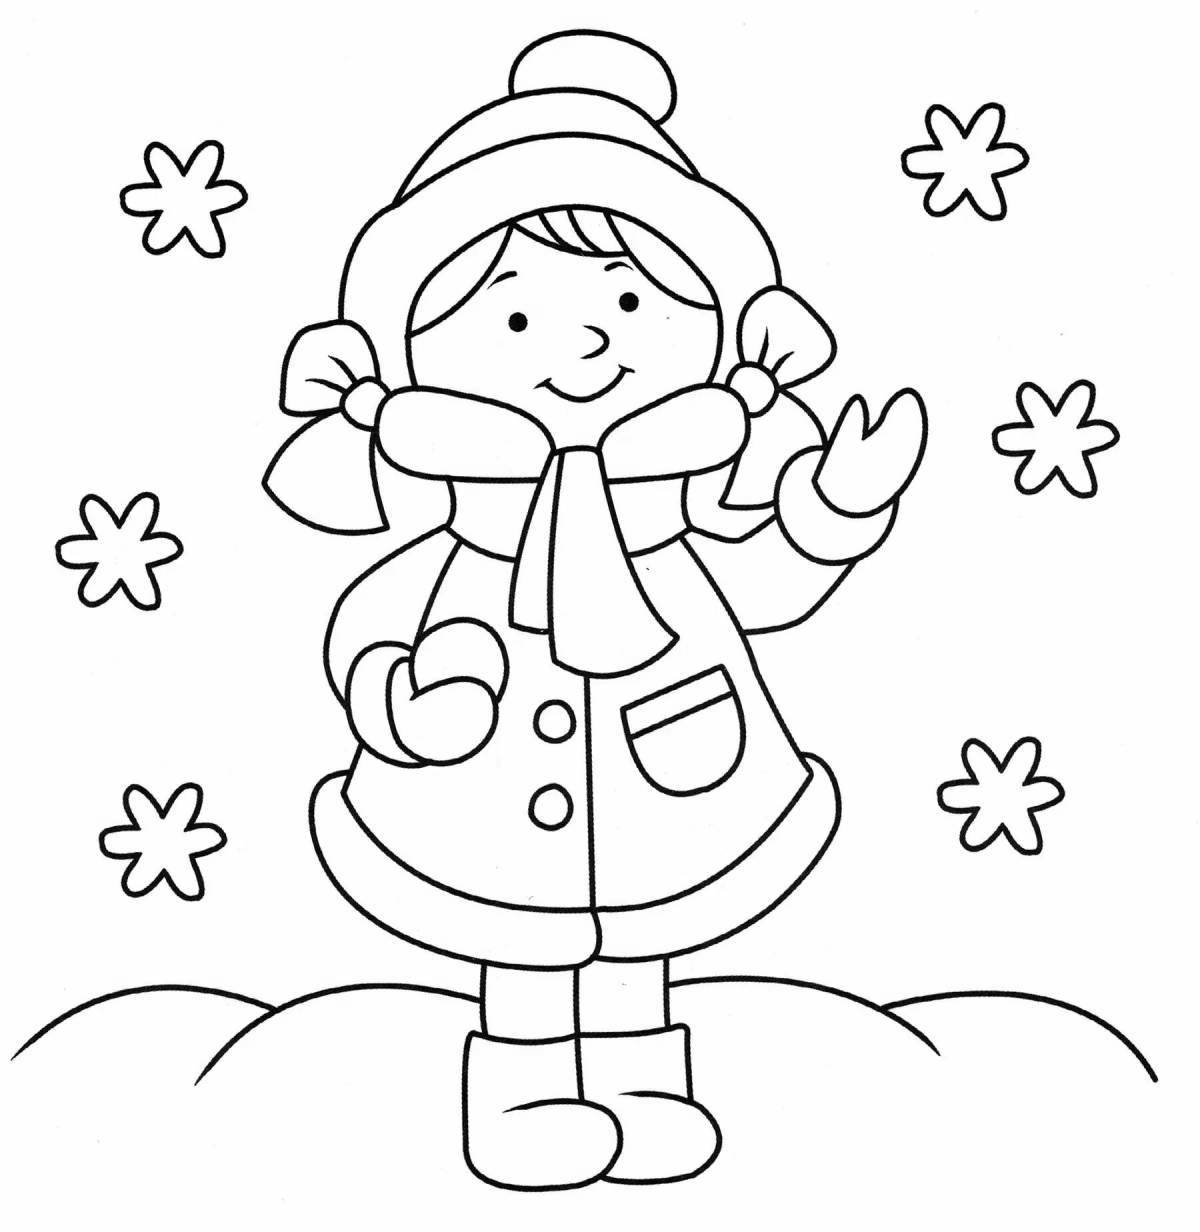 Exciting coloring book for children 3 years old winter